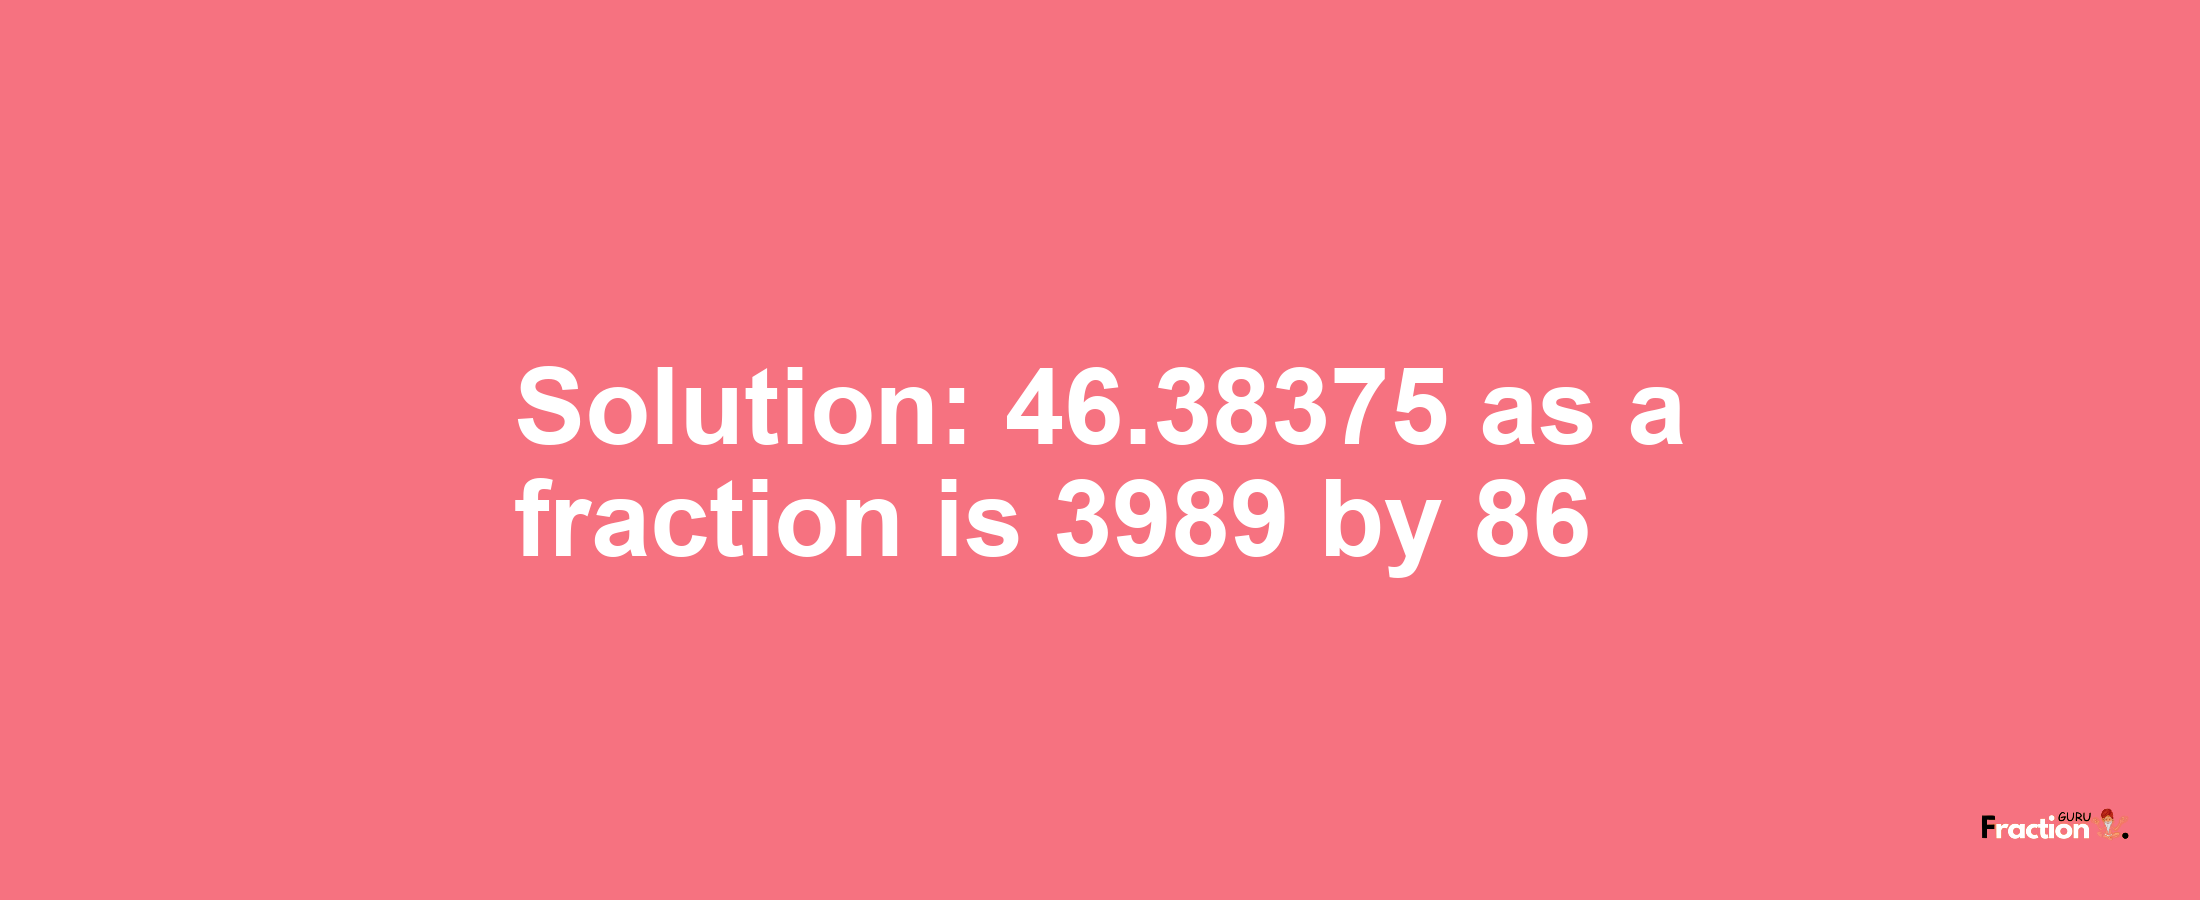 Solution:46.38375 as a fraction is 3989/86